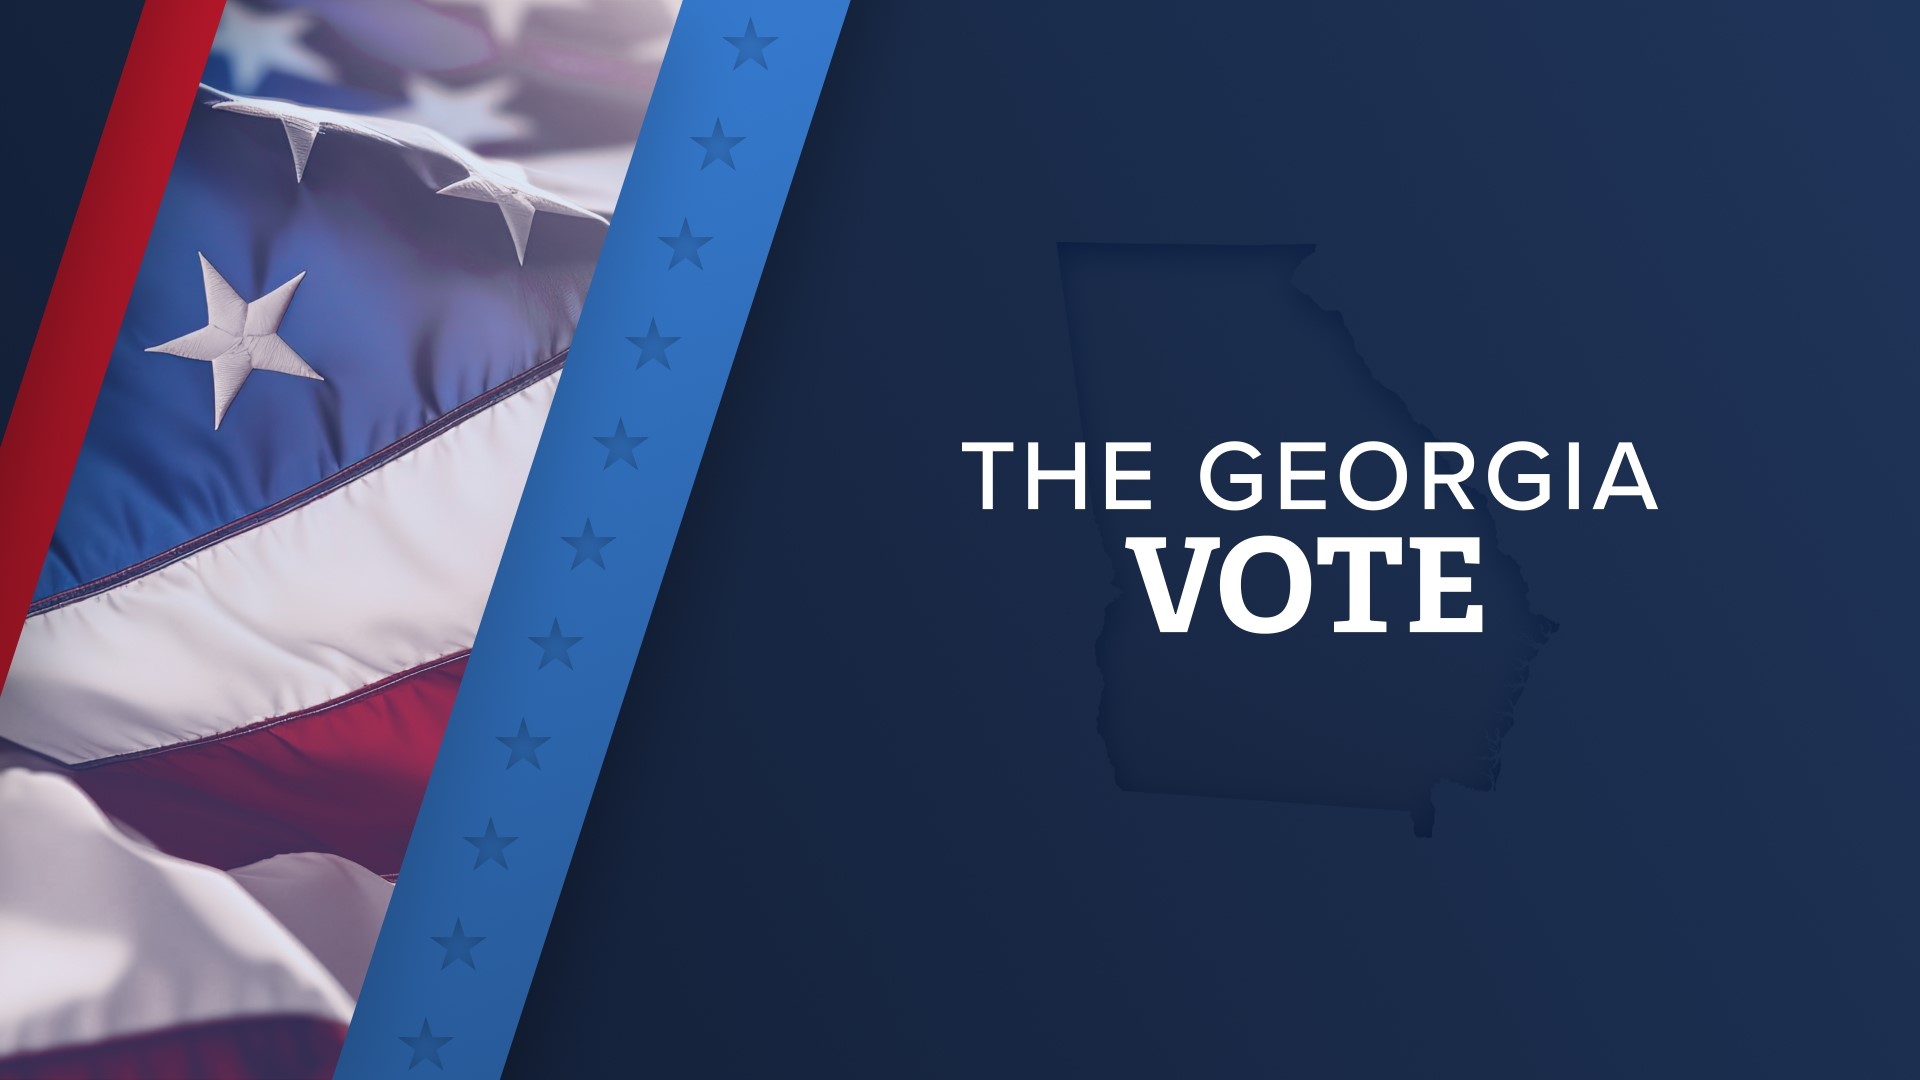 Voters will head to the polls June 18 for a runoff election. Here's this week's episode of The Georgia Vote.